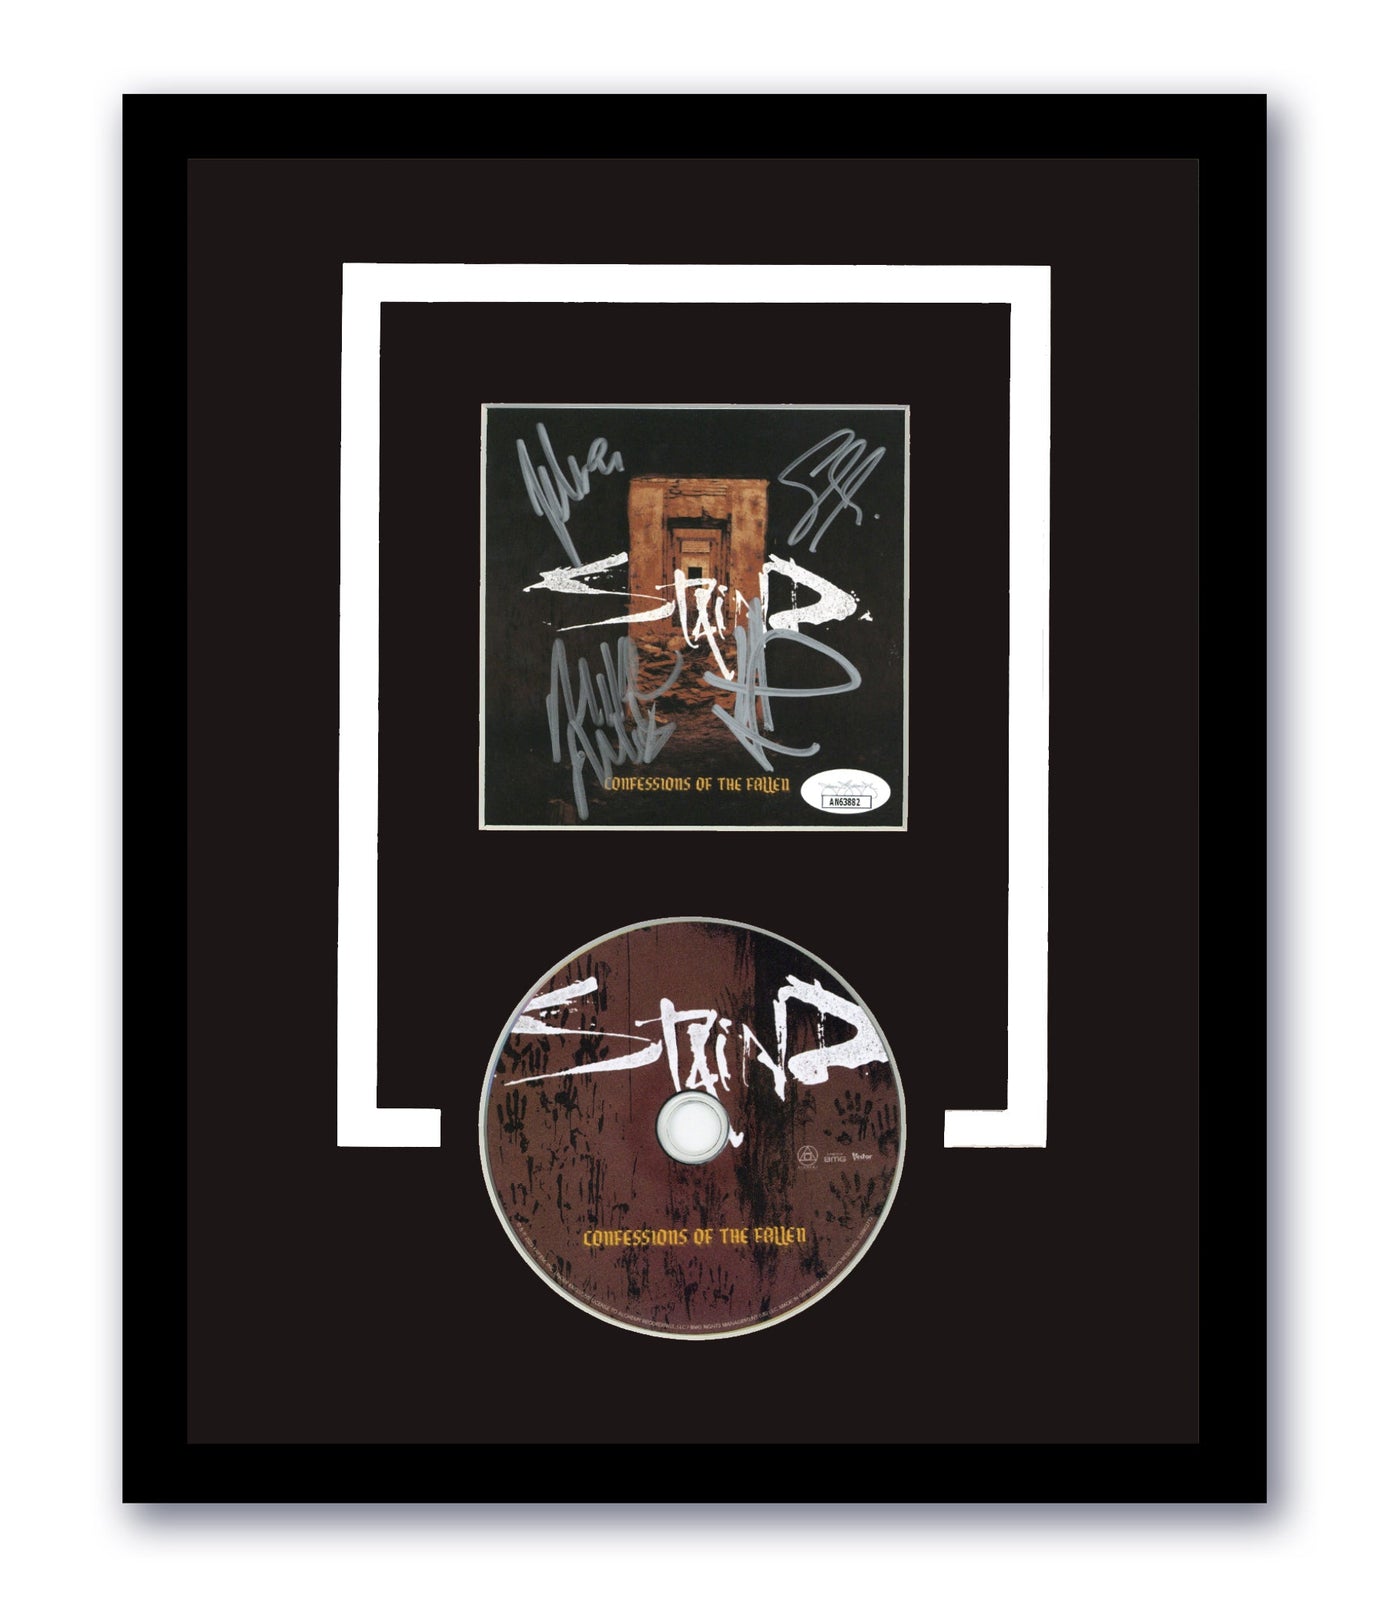 Staind Signed Confessions of the Fallen CD 11x14 Framed Authentic Autographed JSA COA